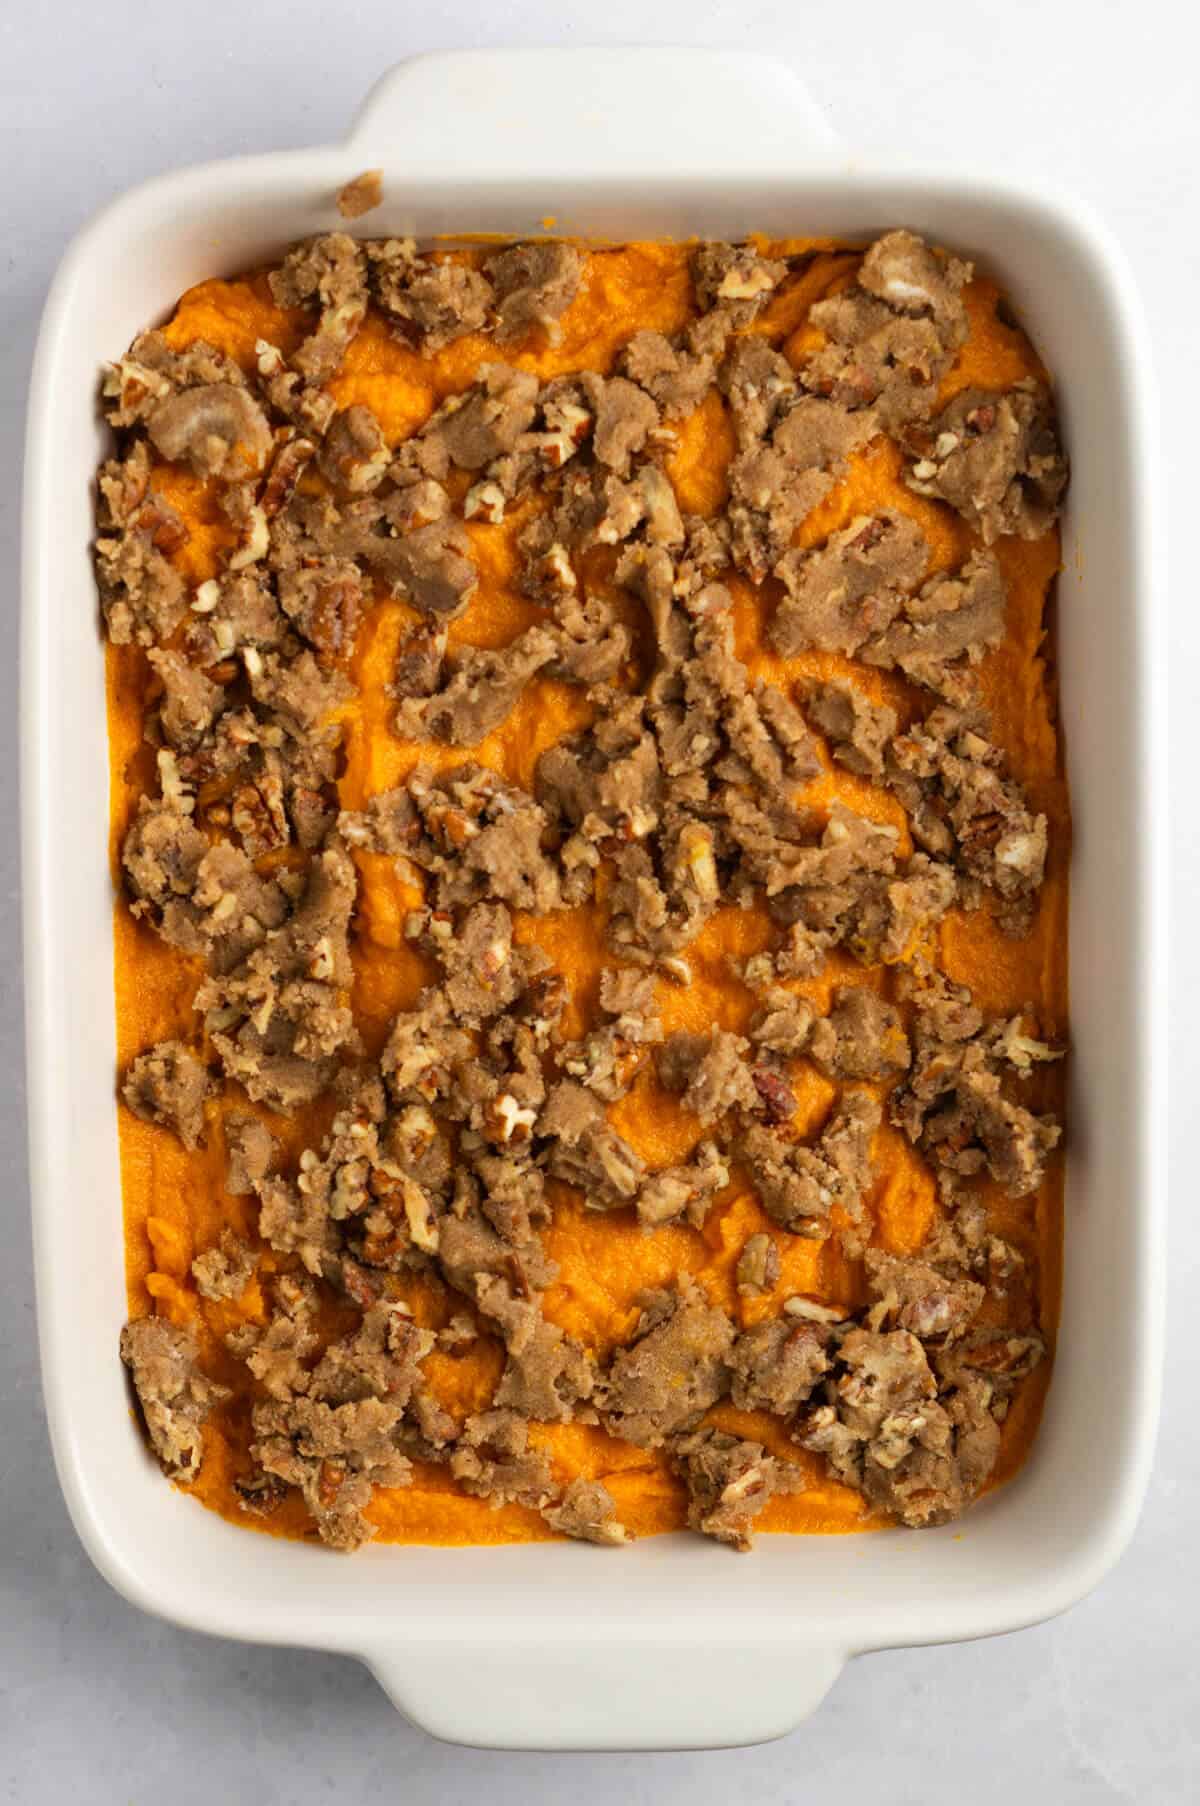 Unbaked sweet potato casserole topped with brown sugar pecan crumble.